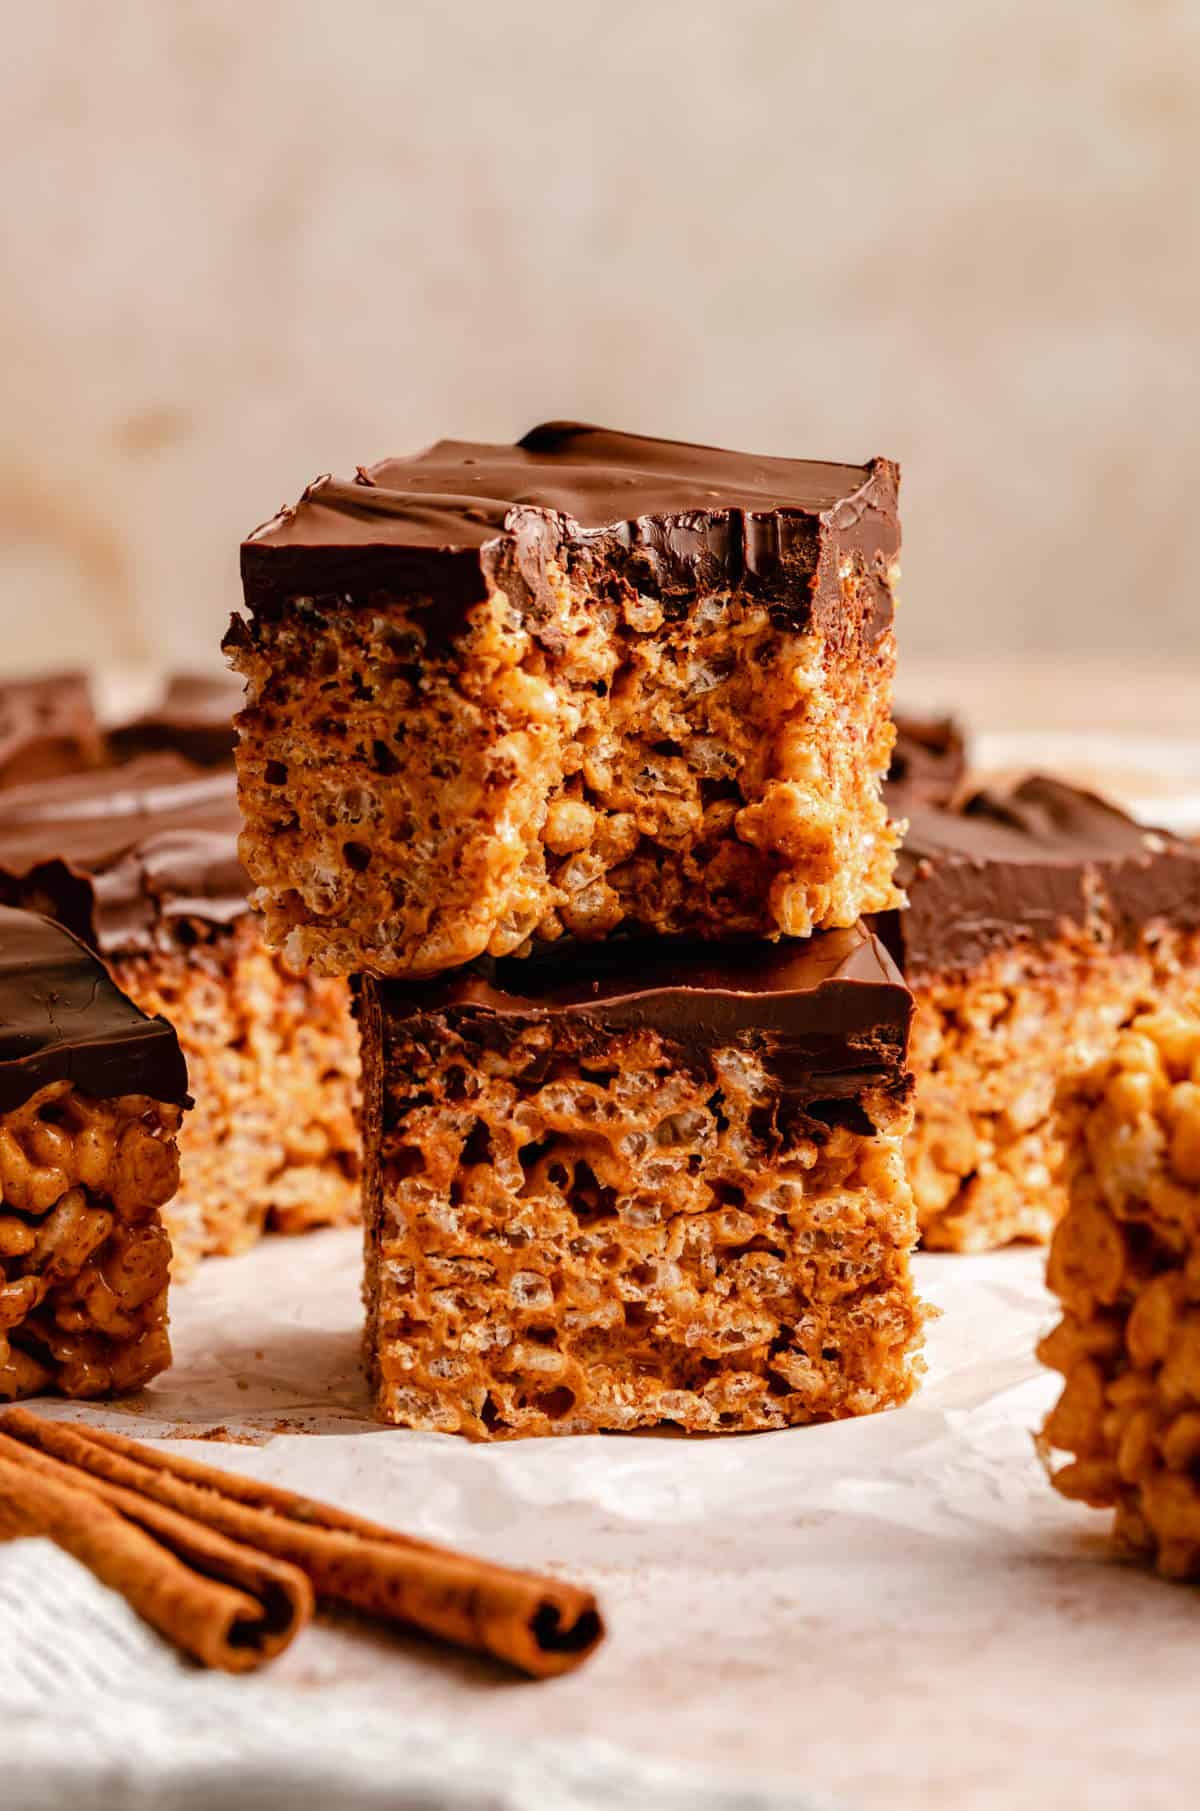 Close up photo of rice krispie bars in a stack, the top bar has a bite taken out of it, cinnamon sticks in the foreground